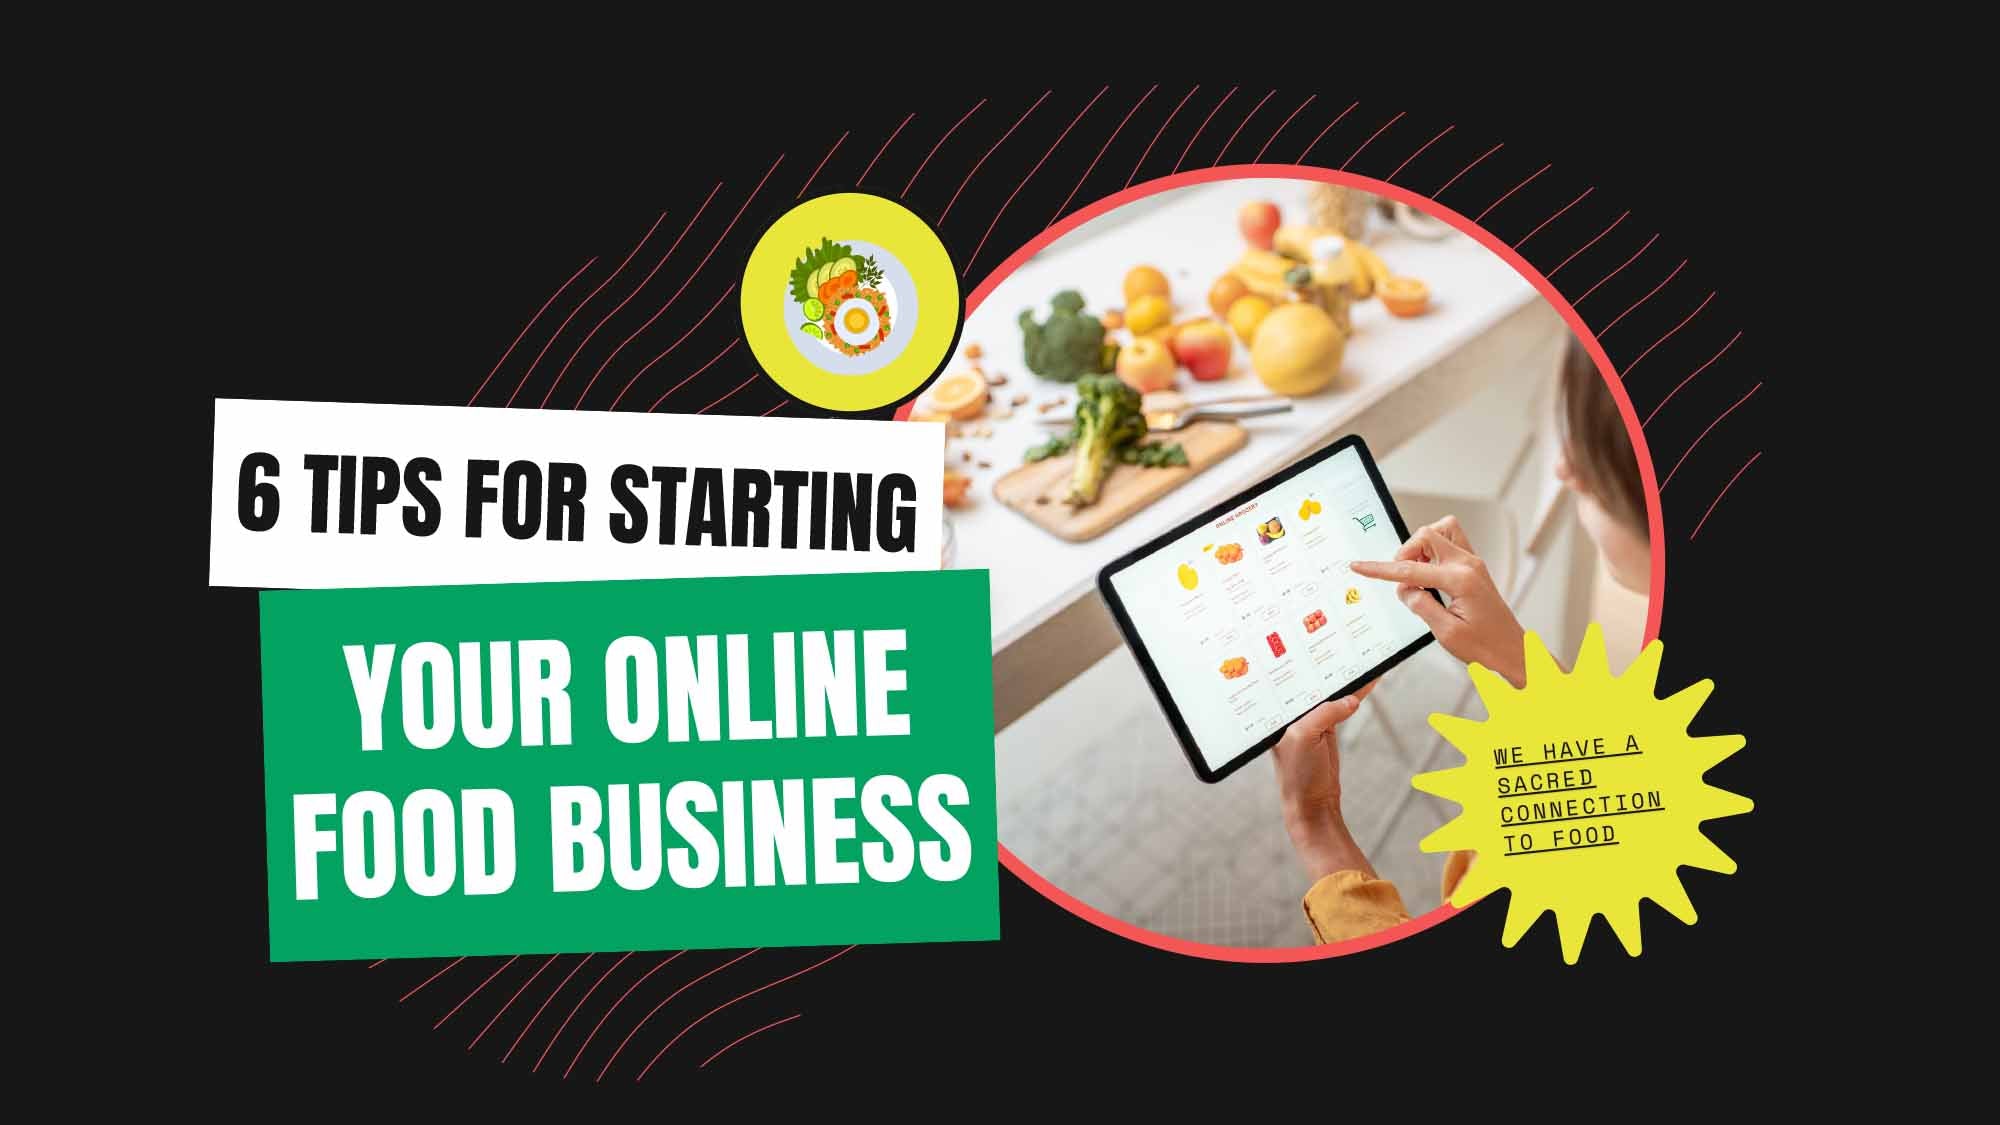 Remember These Amazing Tips Before Kickstarting Your Online Food Business Journey!